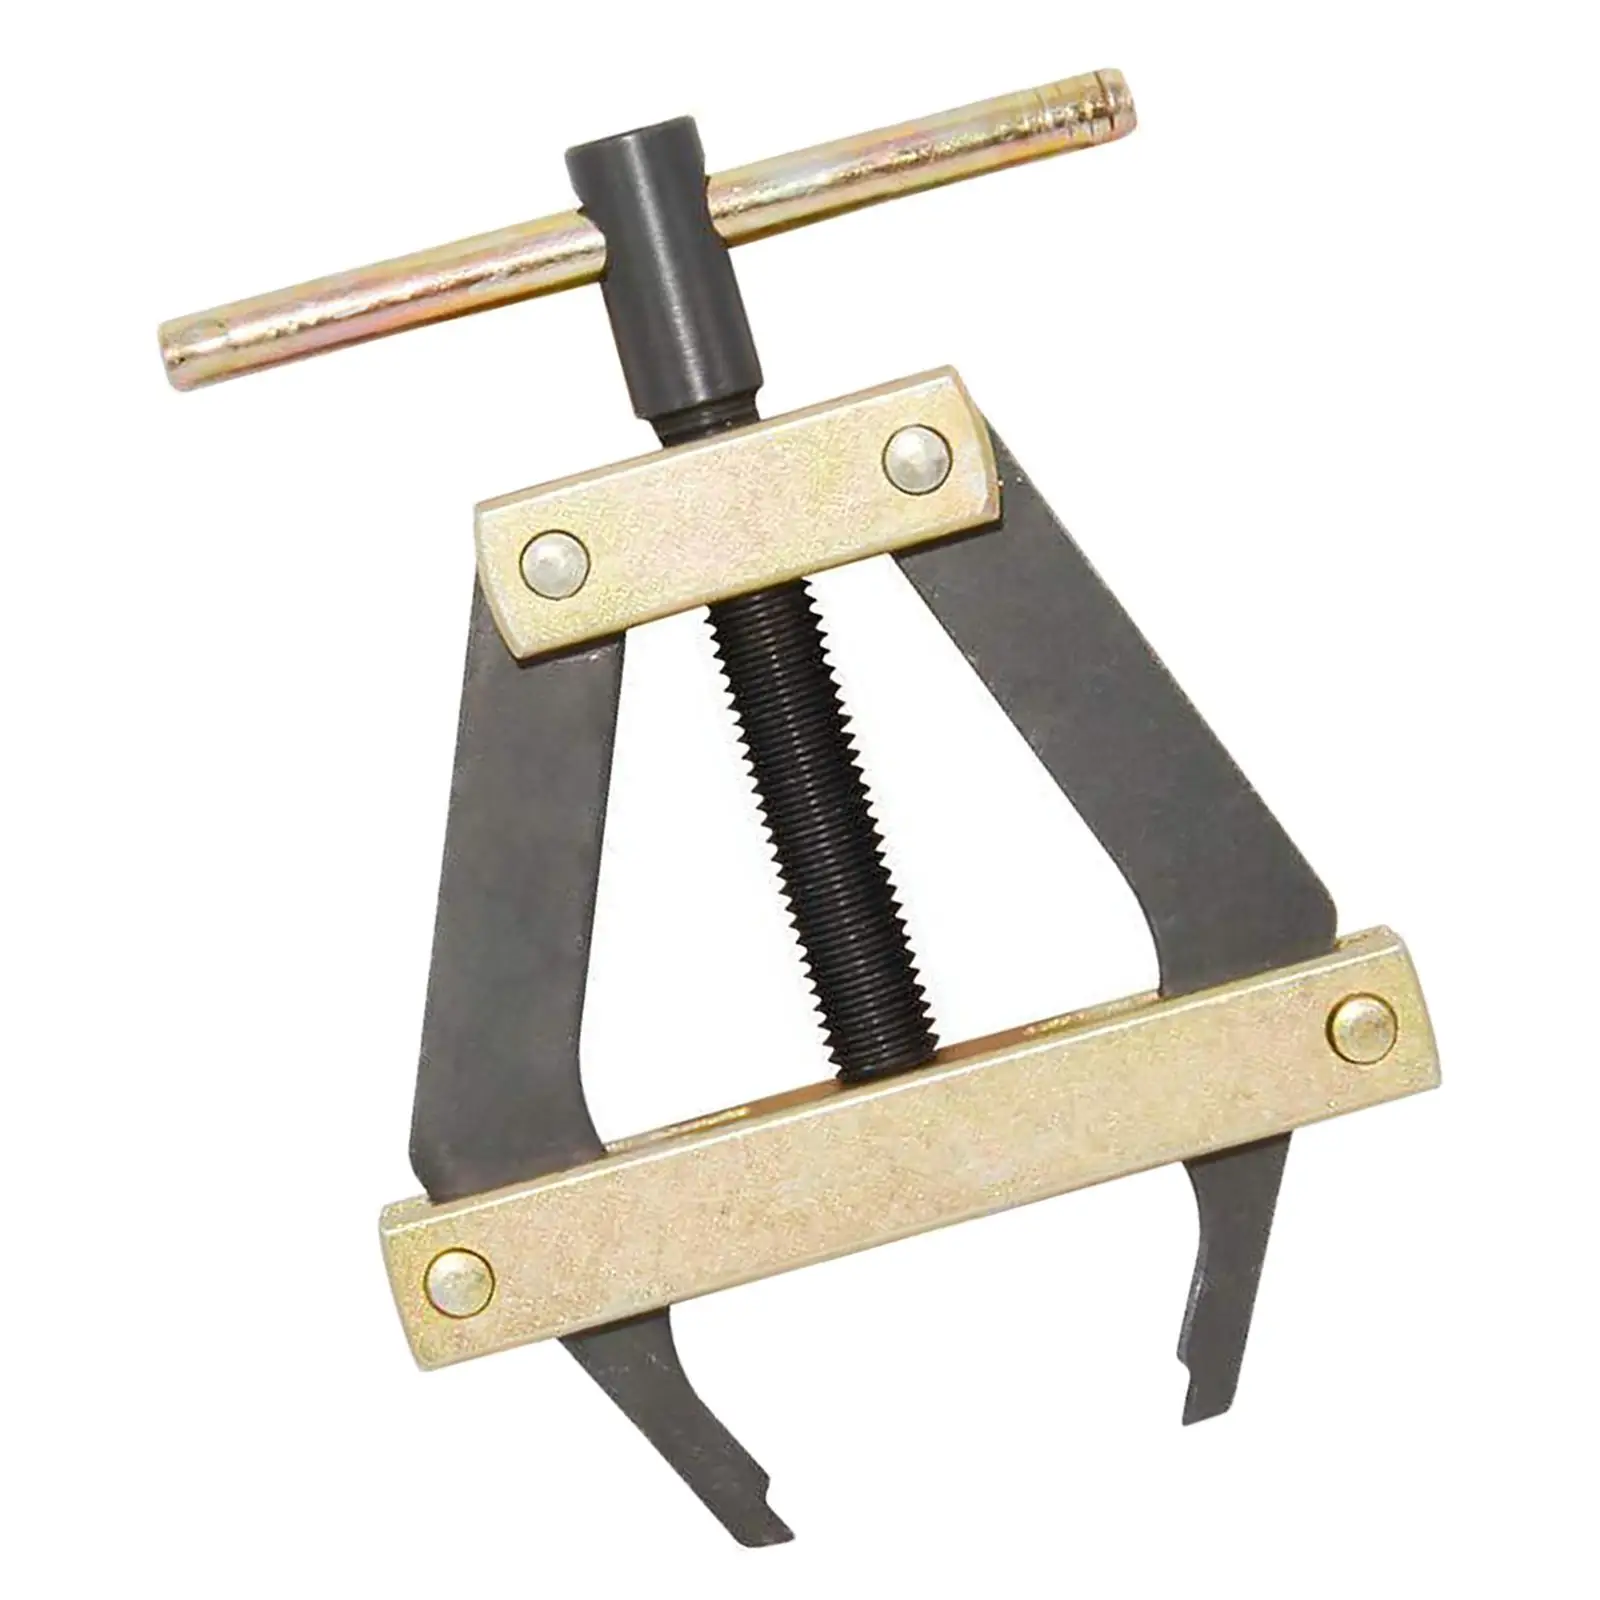 Roller Chain Connecting Puller Holder Tool for Chain Size # 60 80 100 Fits Motorcycle Bicycle Lightweight Replace Durable